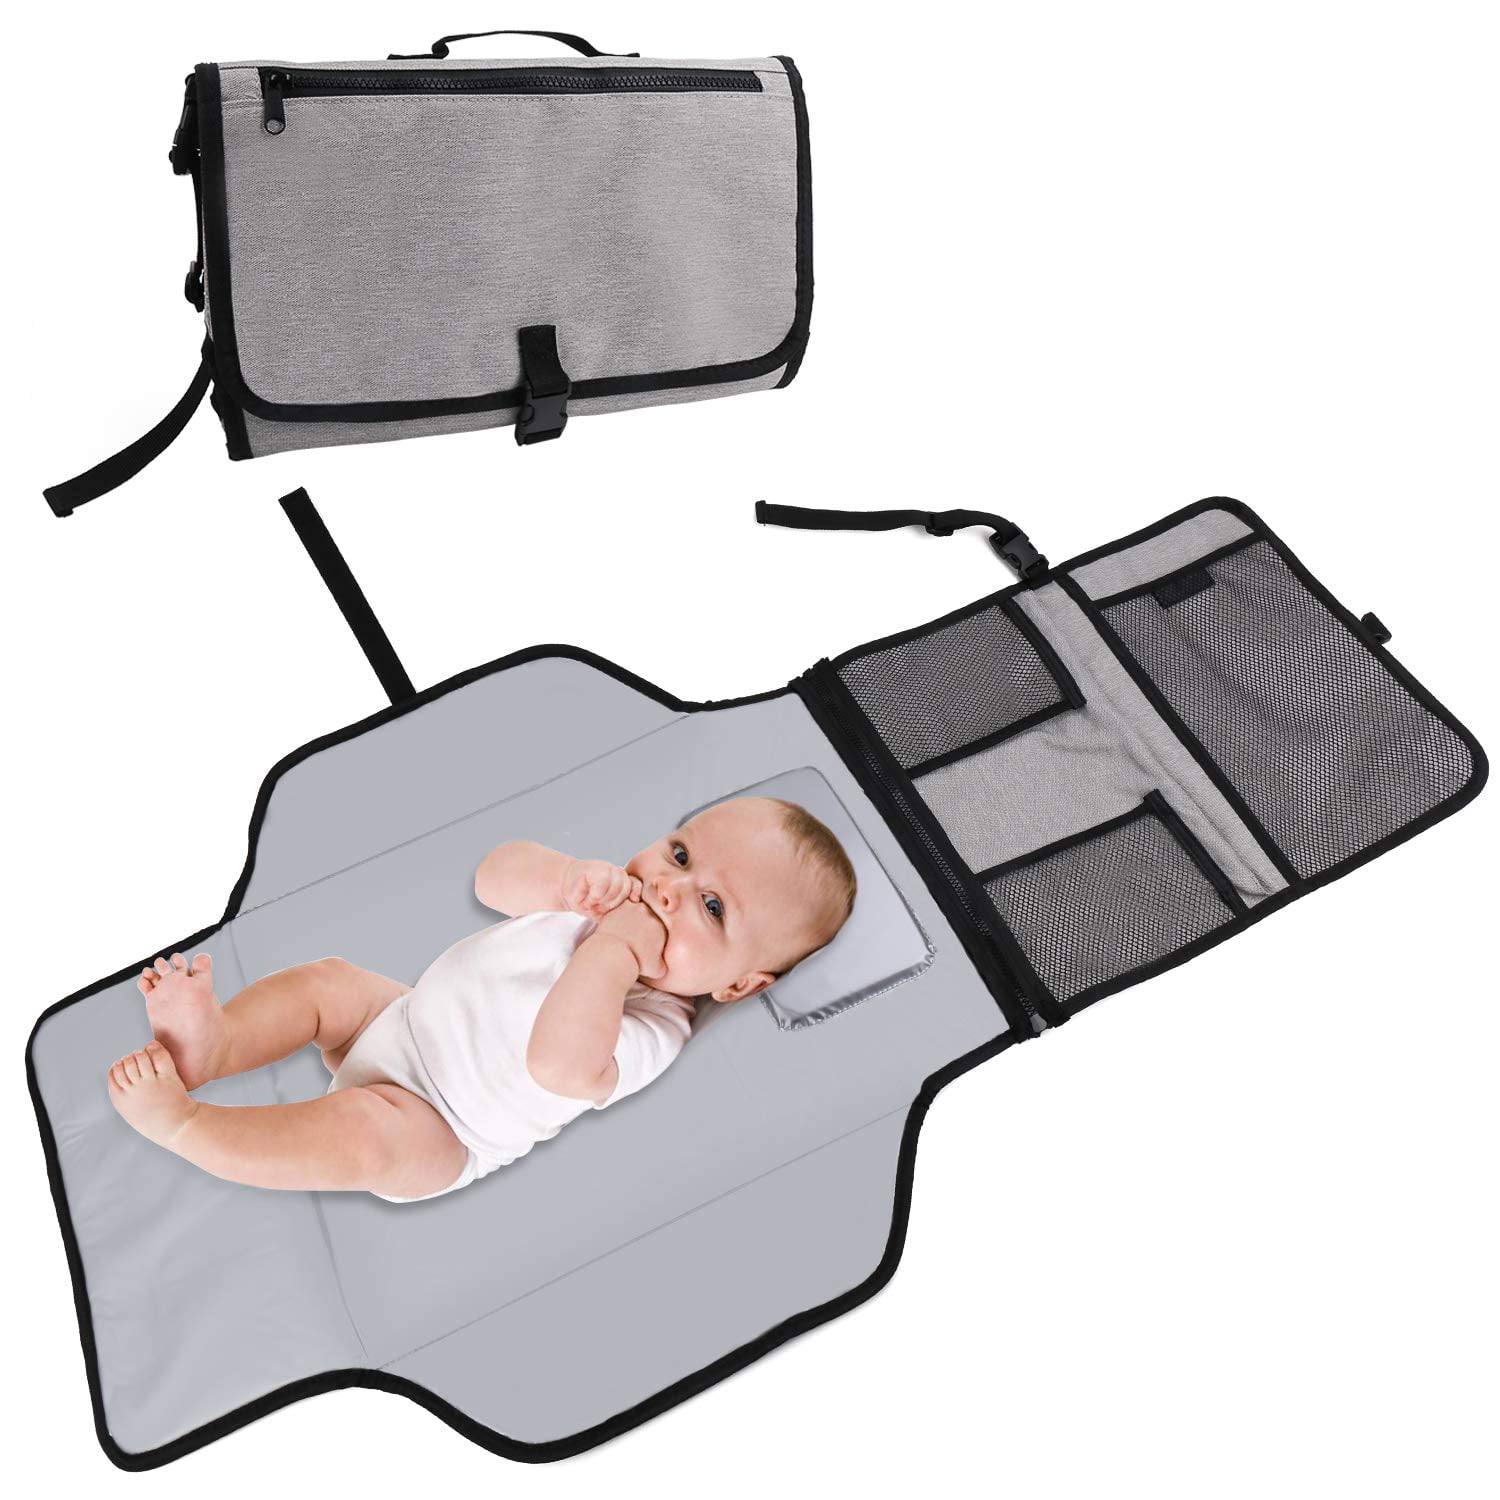 Earth Green, Compact Diaper Bag,Travel Mat Station Baby Portable Changing Pad